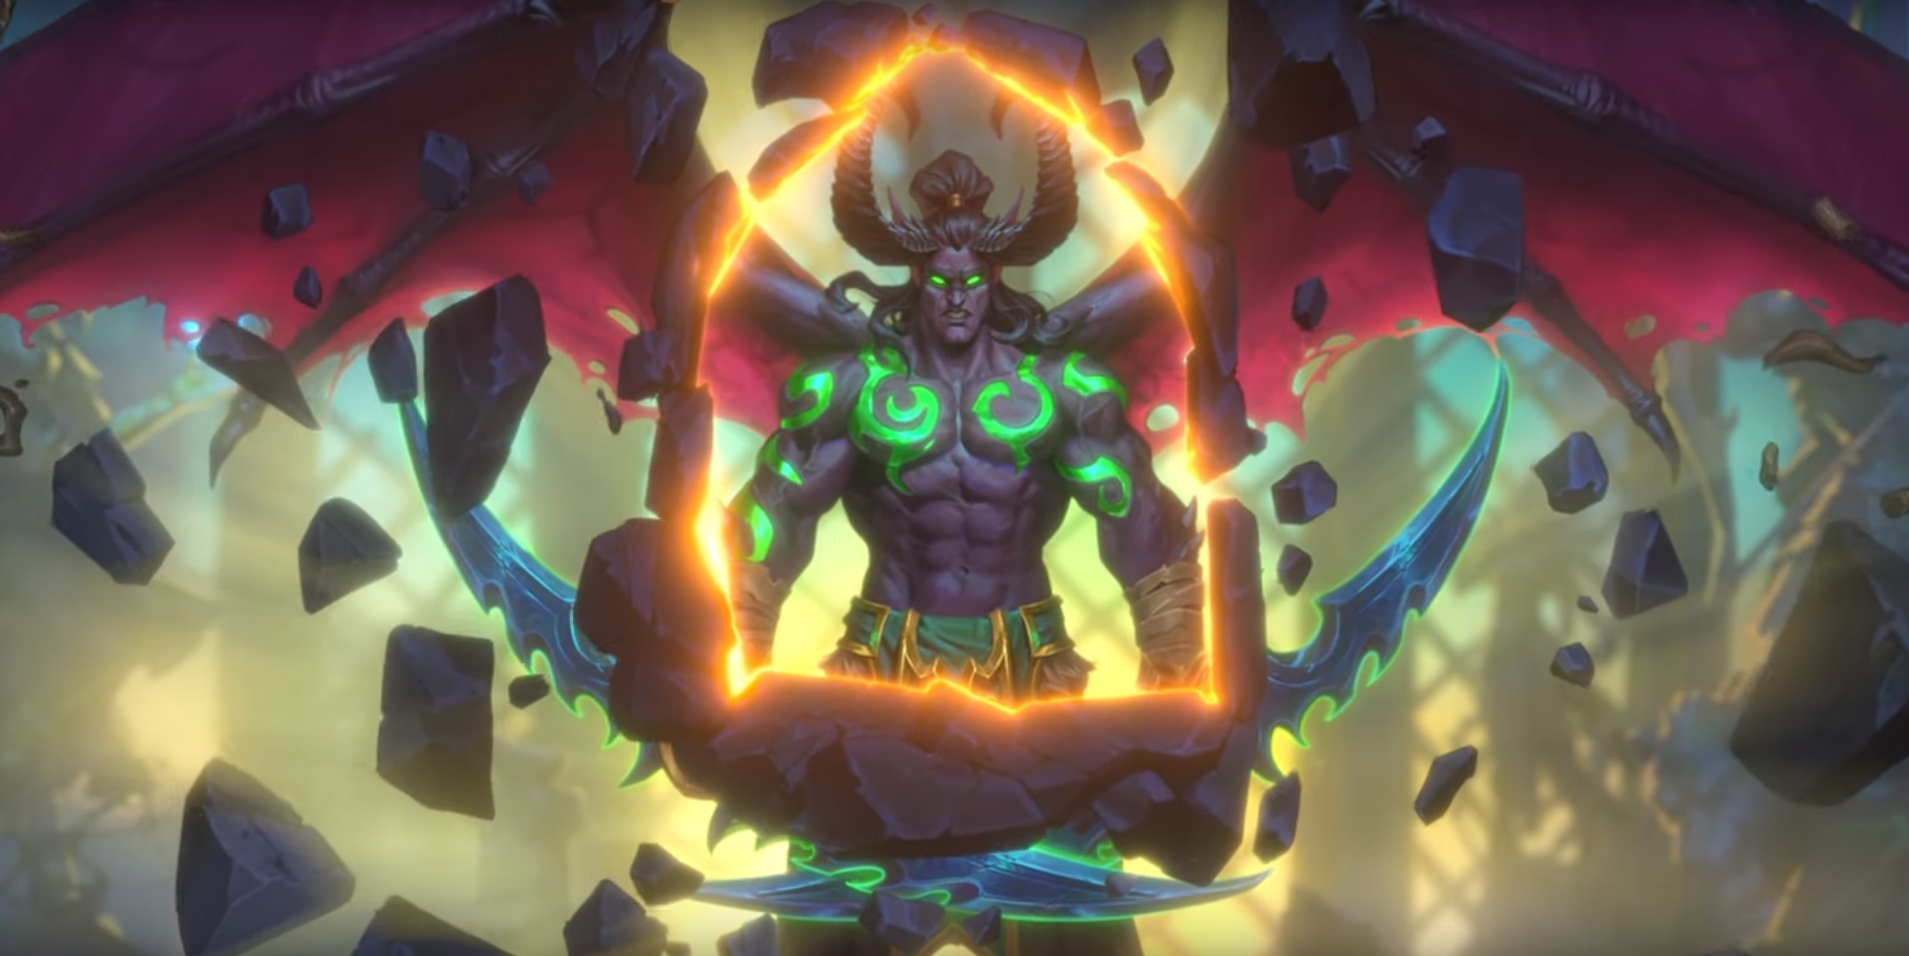 Blizzard Announces An Online Pre-Release Event For Upcoming Hearthstone Expansion